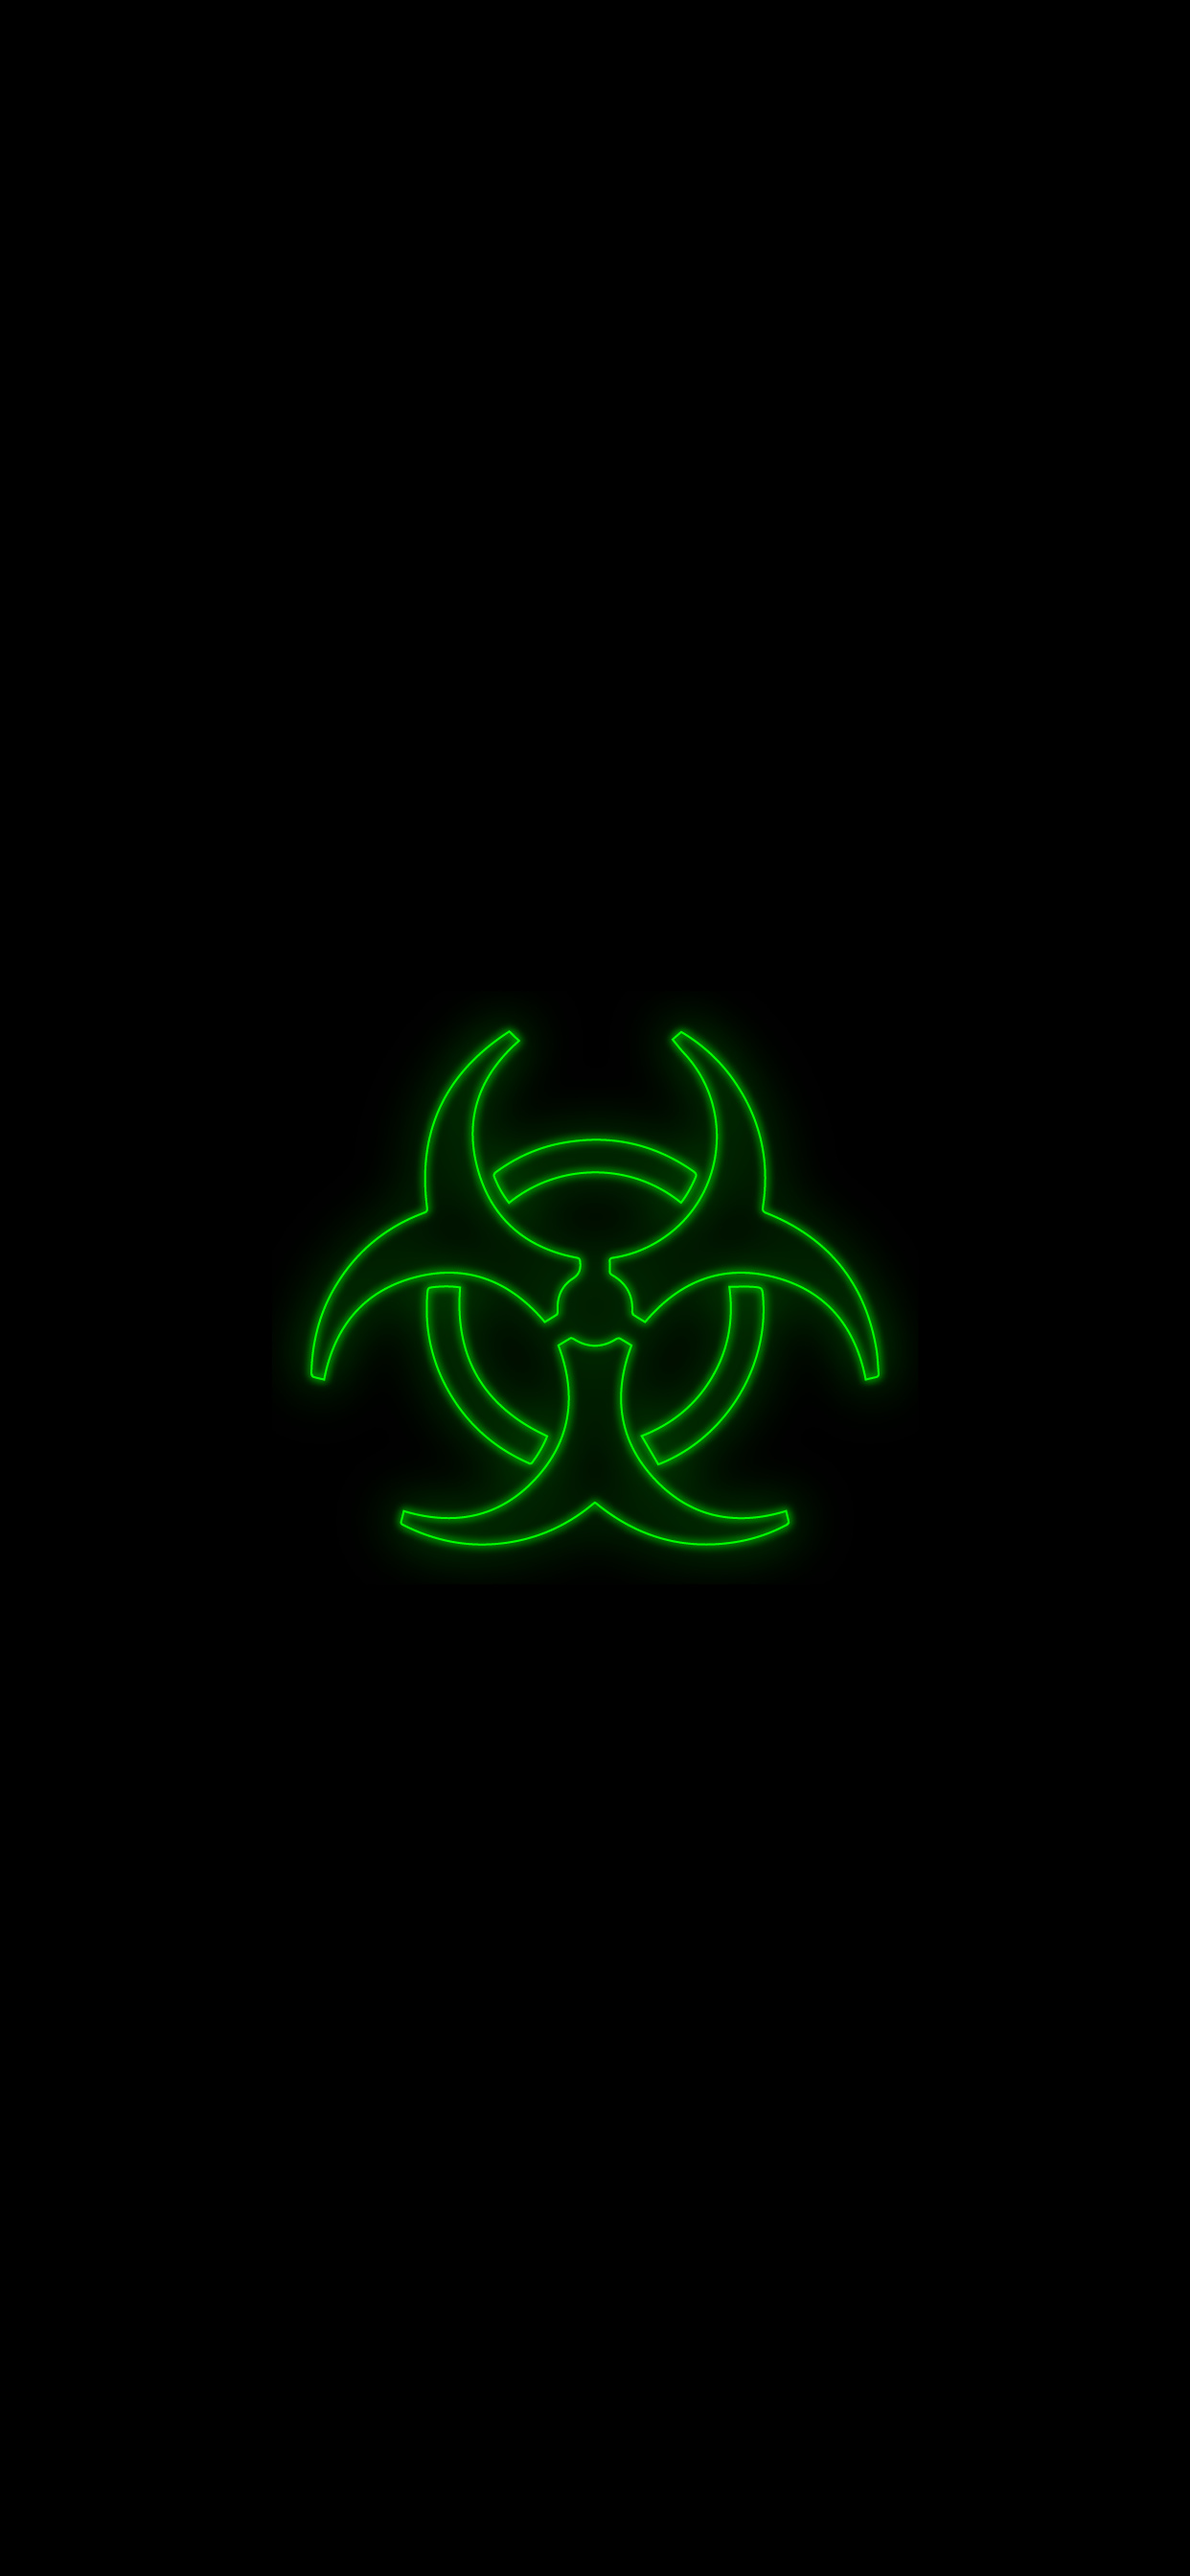 Green Biohazard: The new standard for all biological hazards with Level 1 being minimum risk and Level 4 being extreme risk. 1250x2690 HD Background.